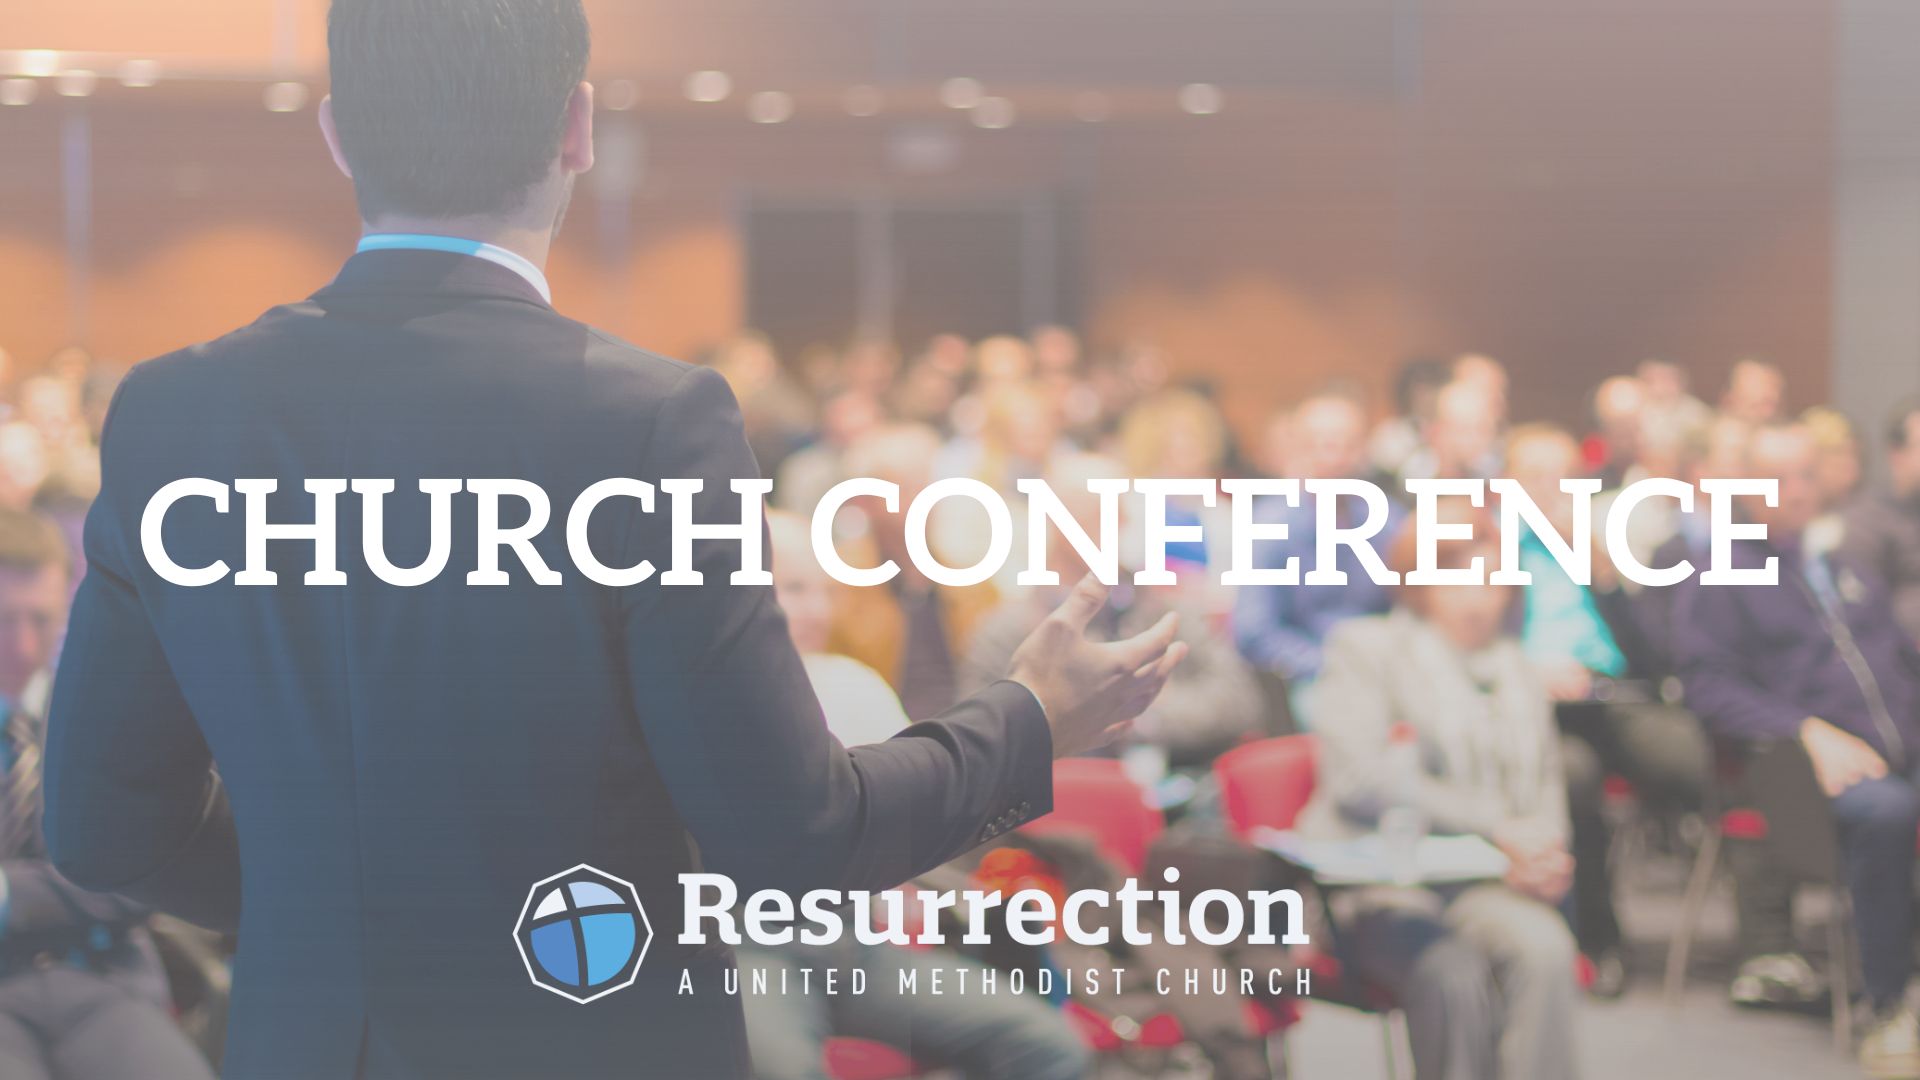 Church Conference - 1920x1080